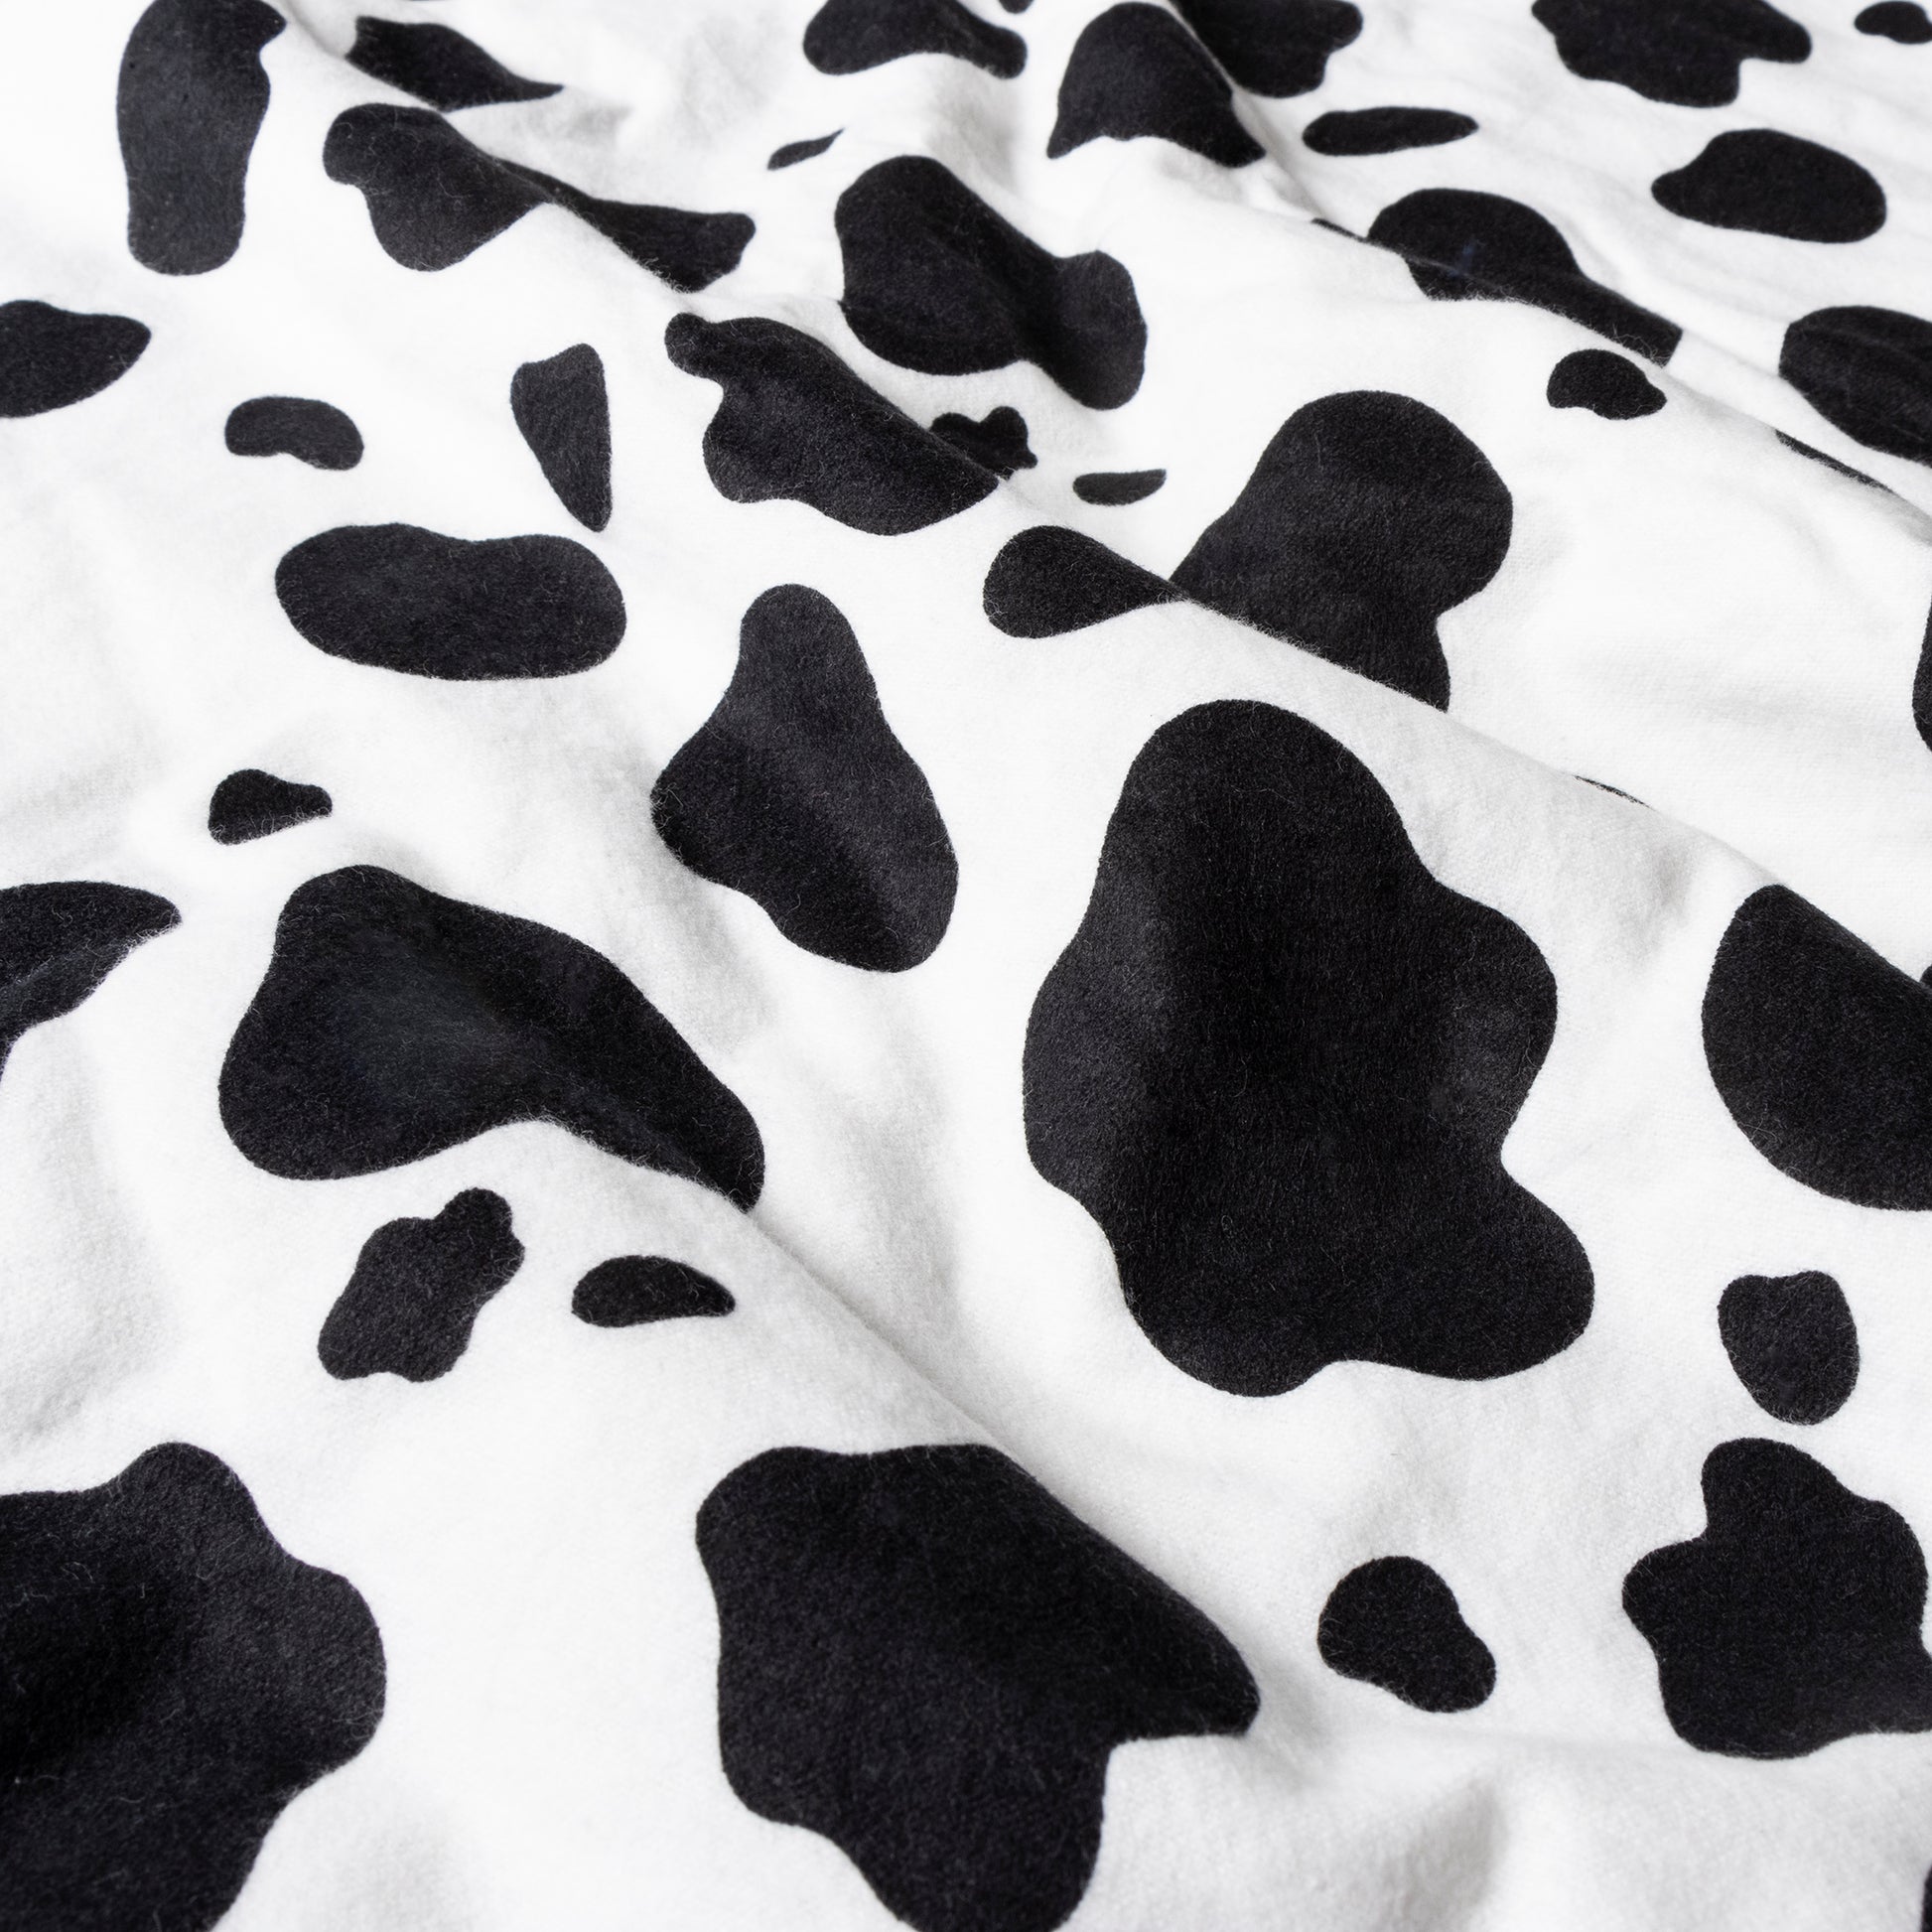  Black & White Cow Print Deluxe Flannel Fitted Crib Sheet - flannel fabric details